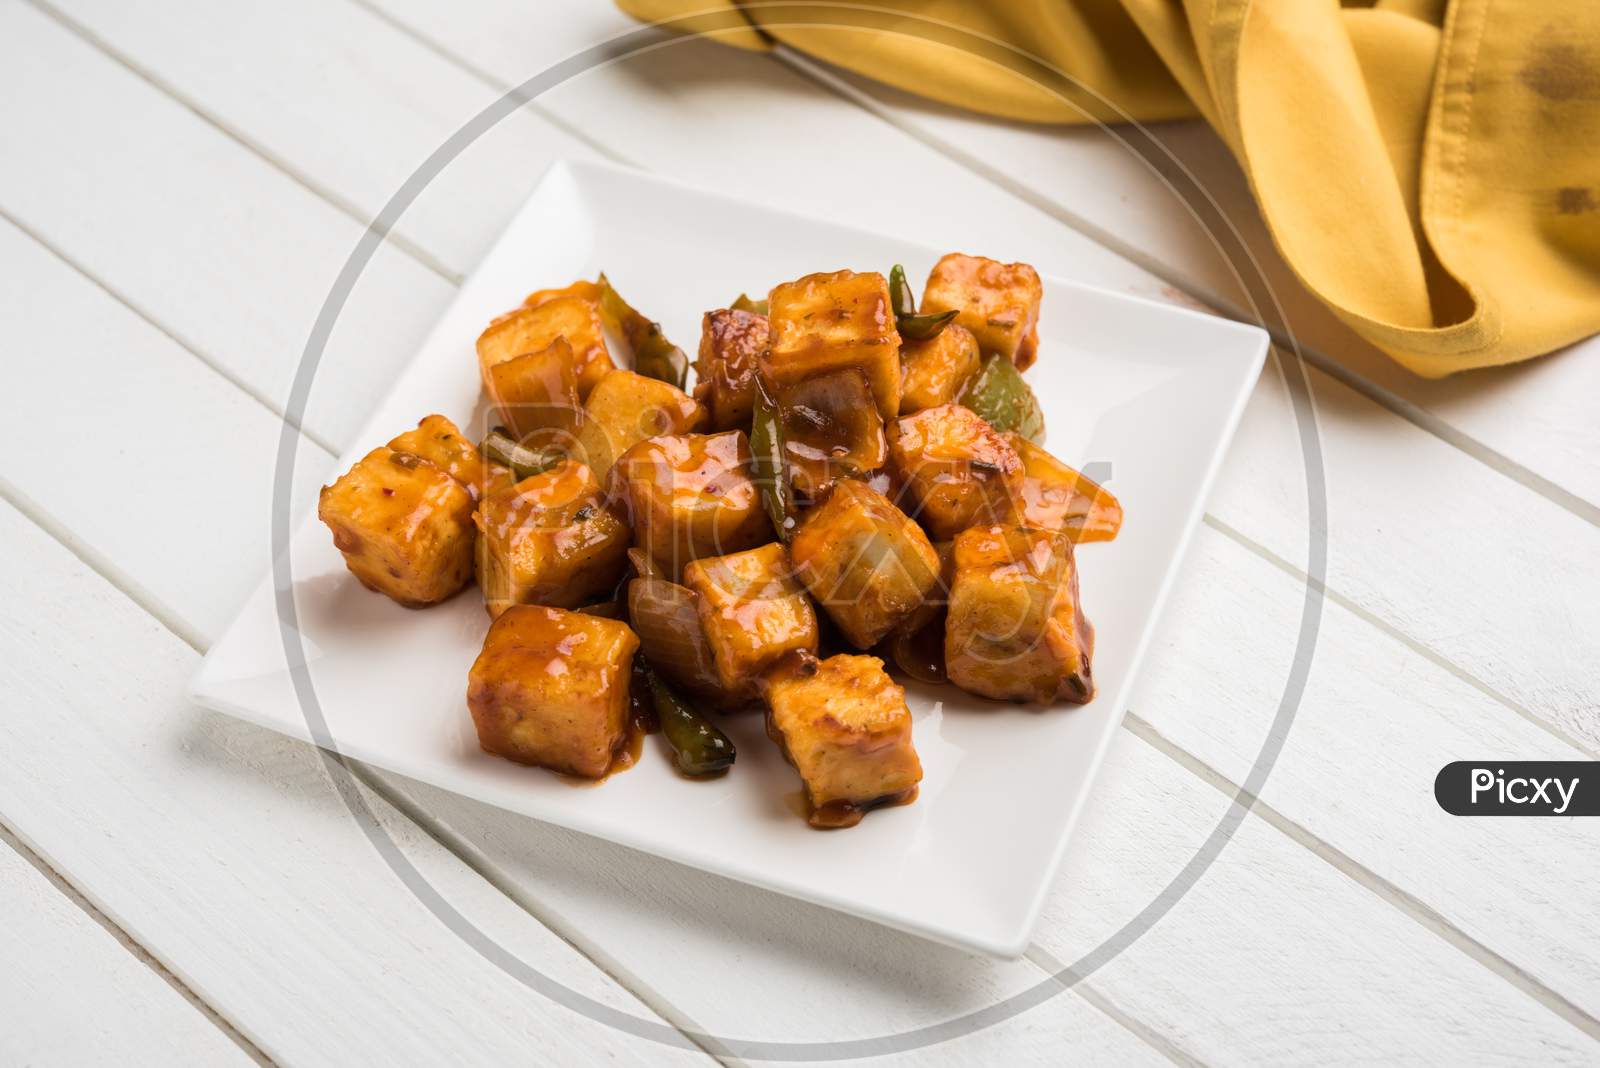 Chilli paneer or Spicy cottage cheese